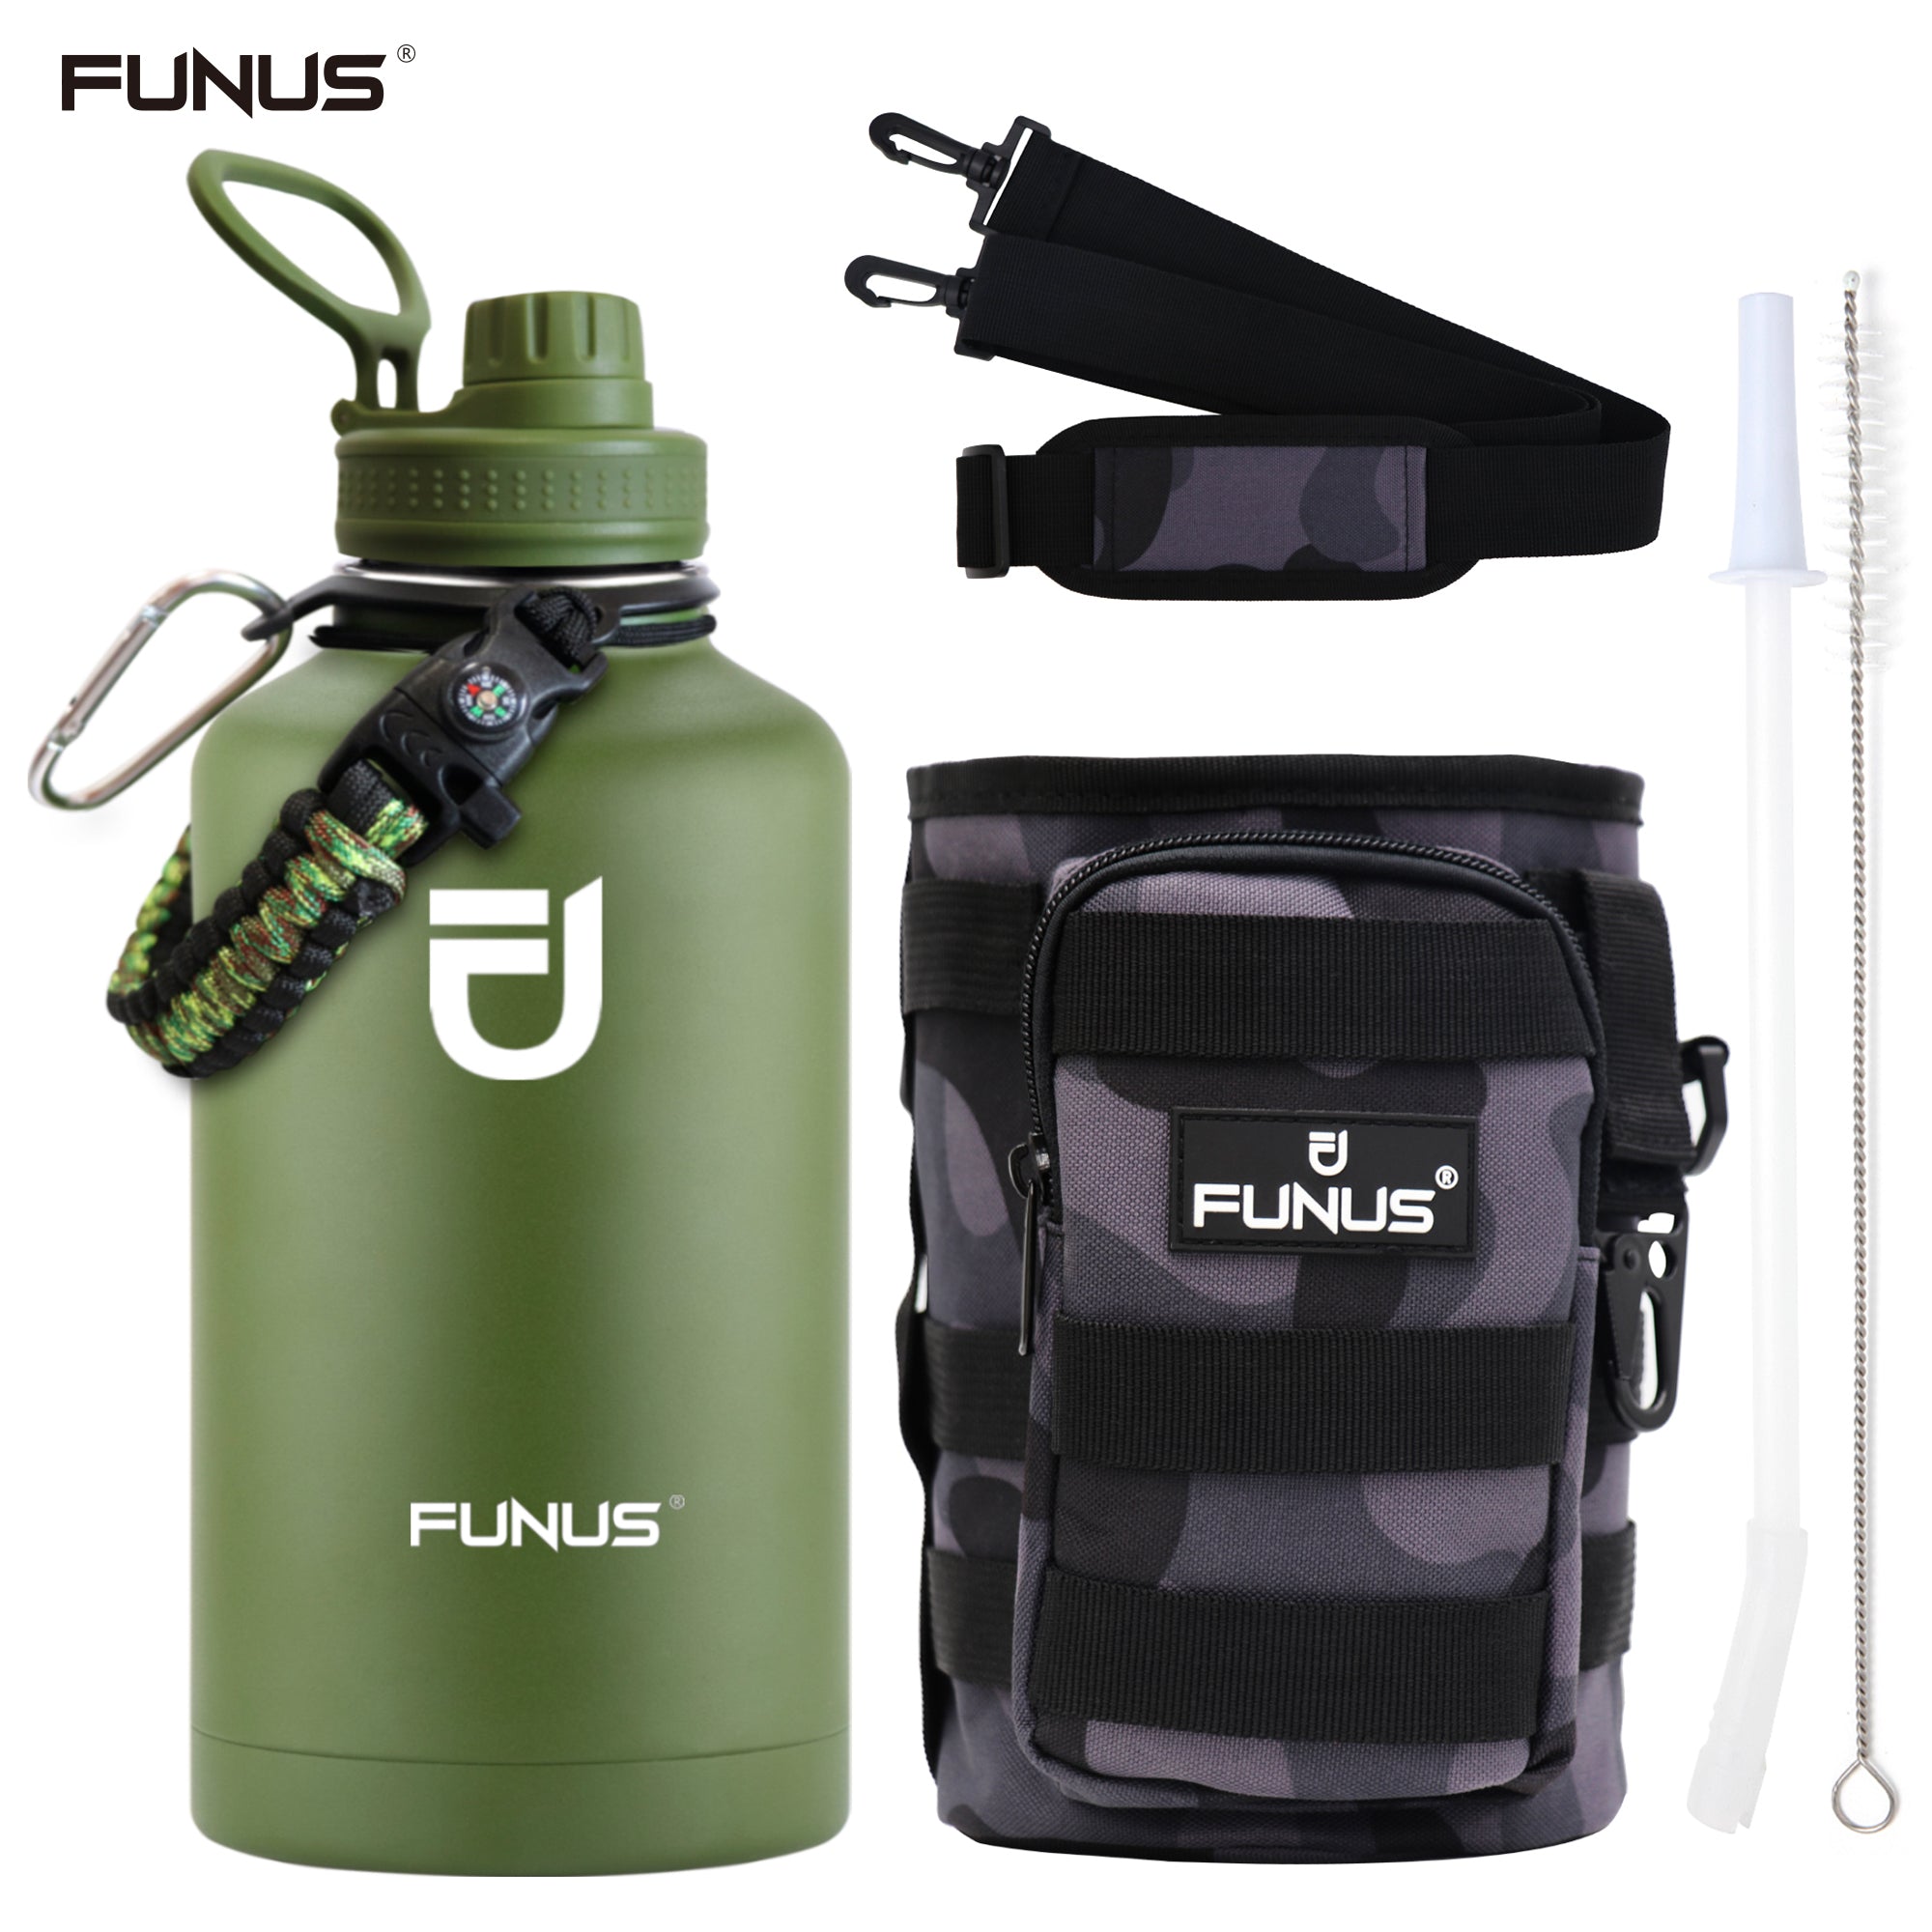 FUNUS 64oz Insulated Water Bottle With Carrier Bag & Paracord